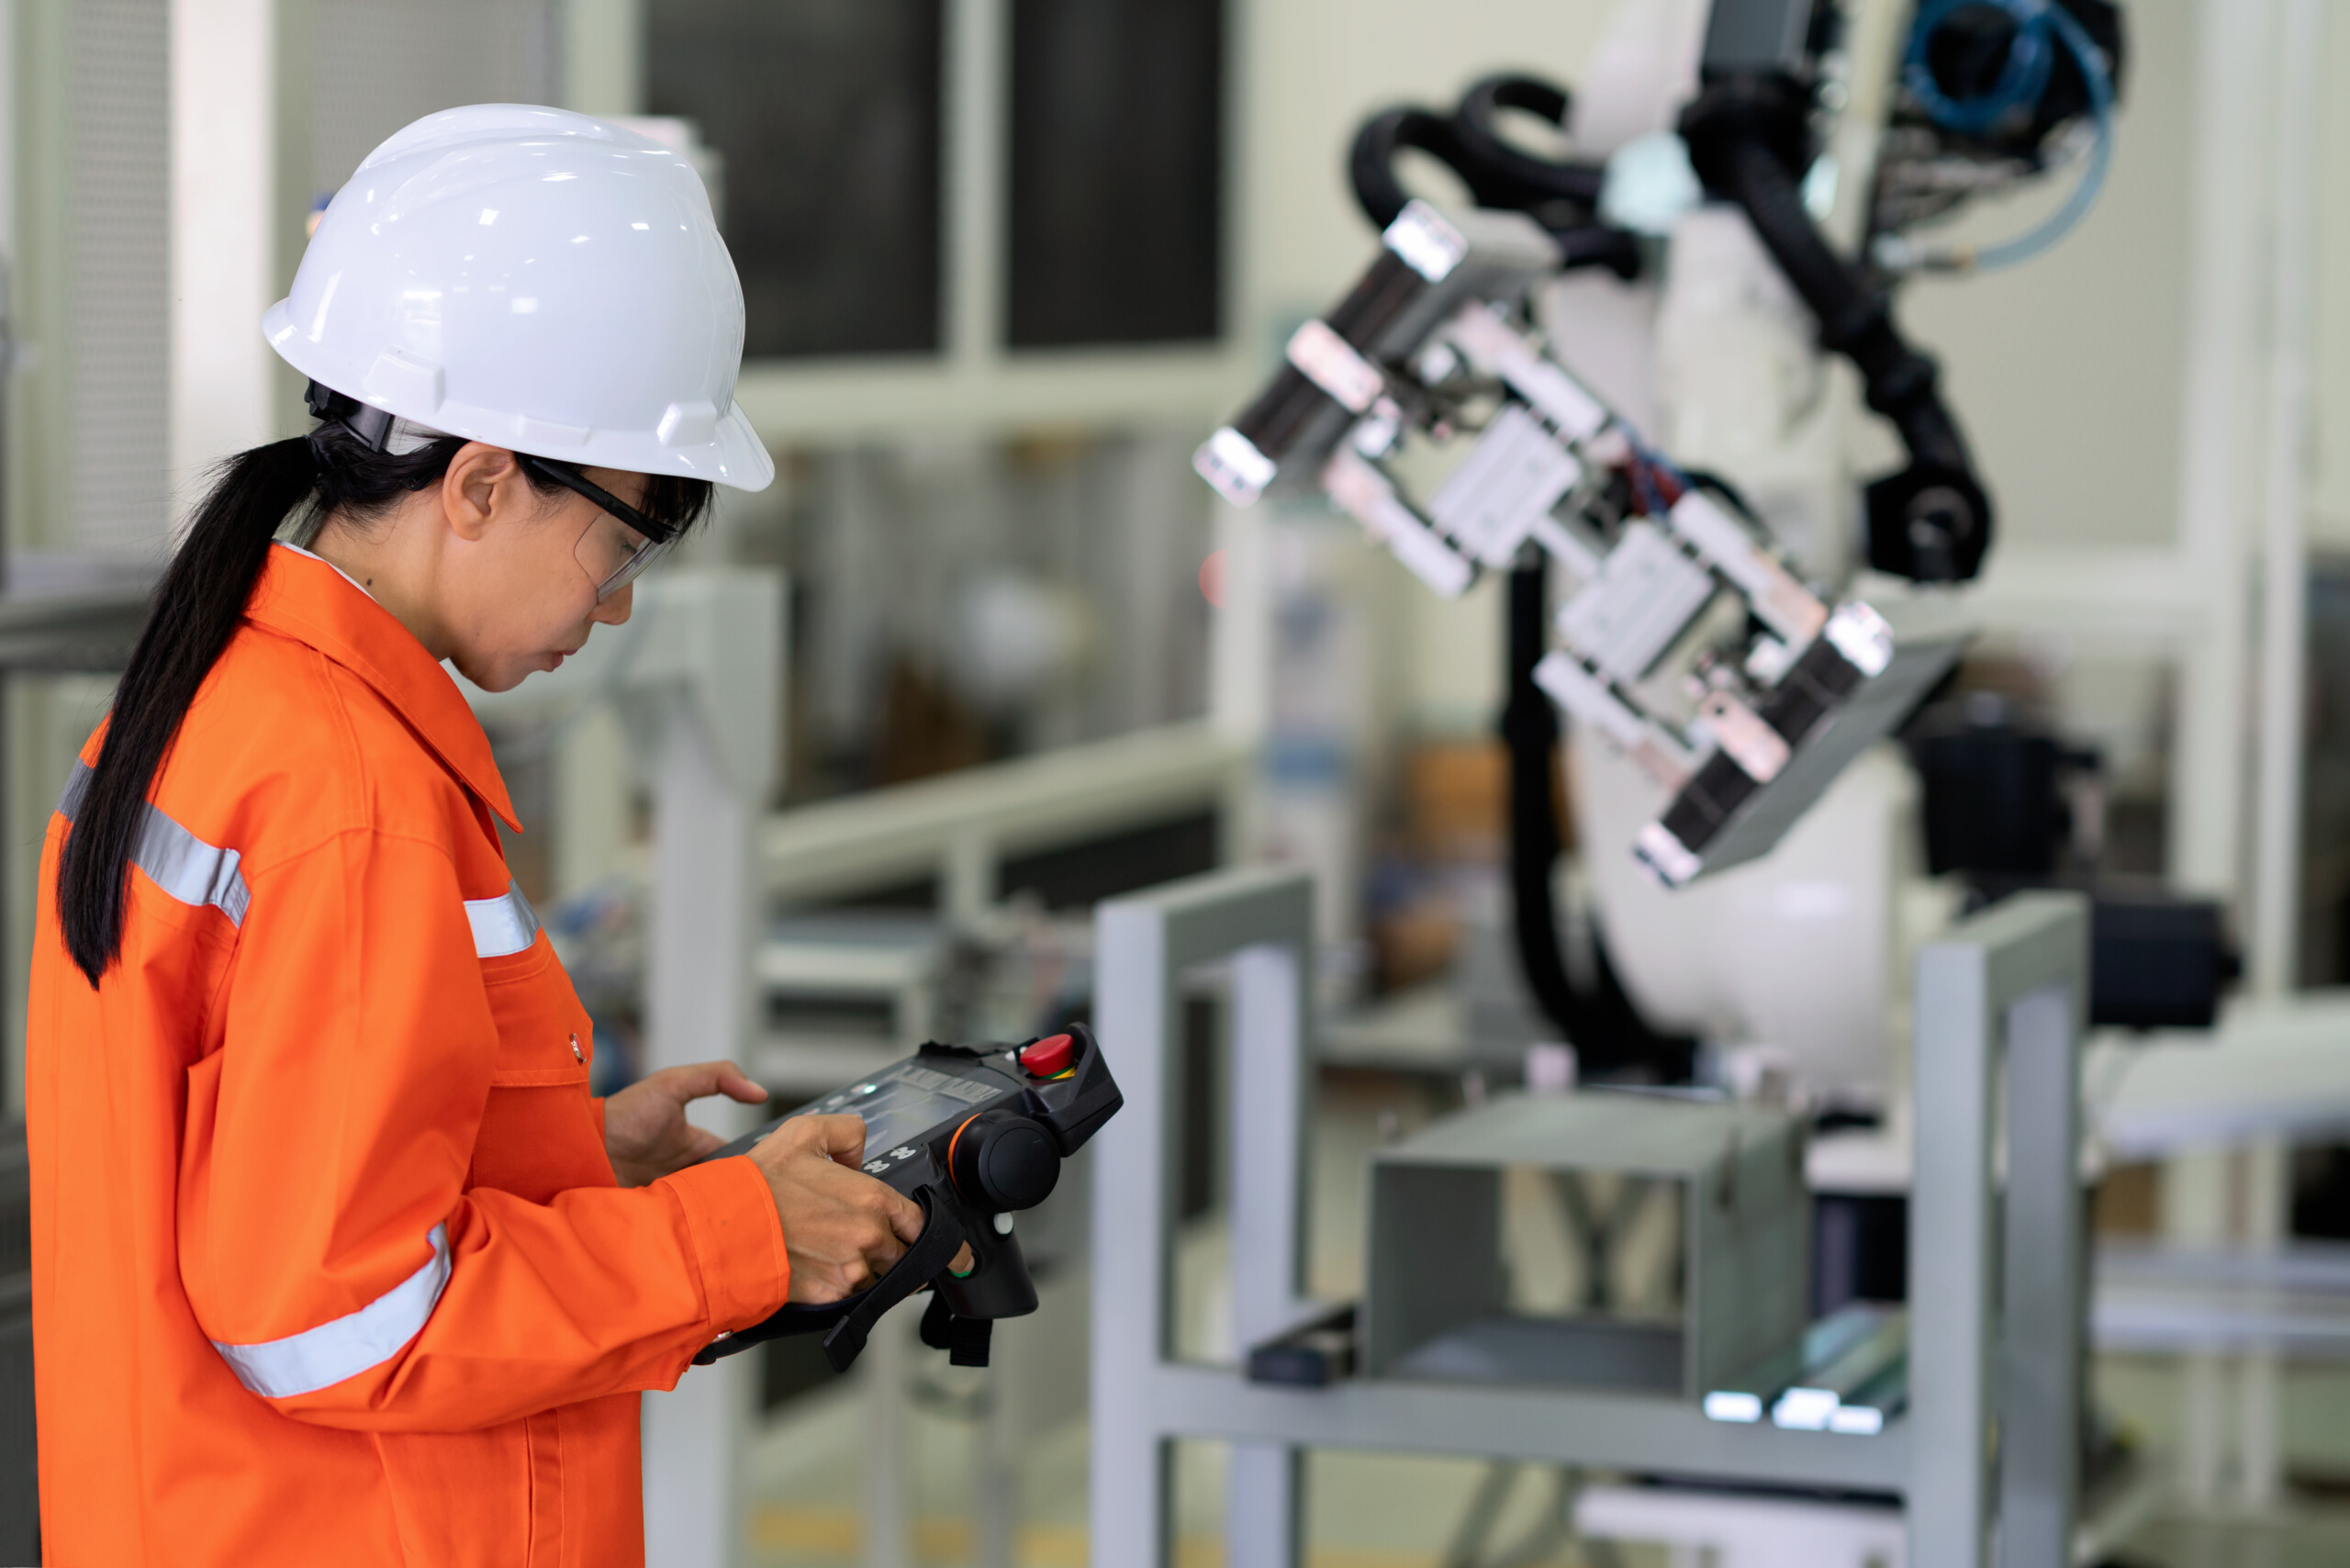 Collaborative Robotics: Helping to create a safer workplace and more engaged workforce